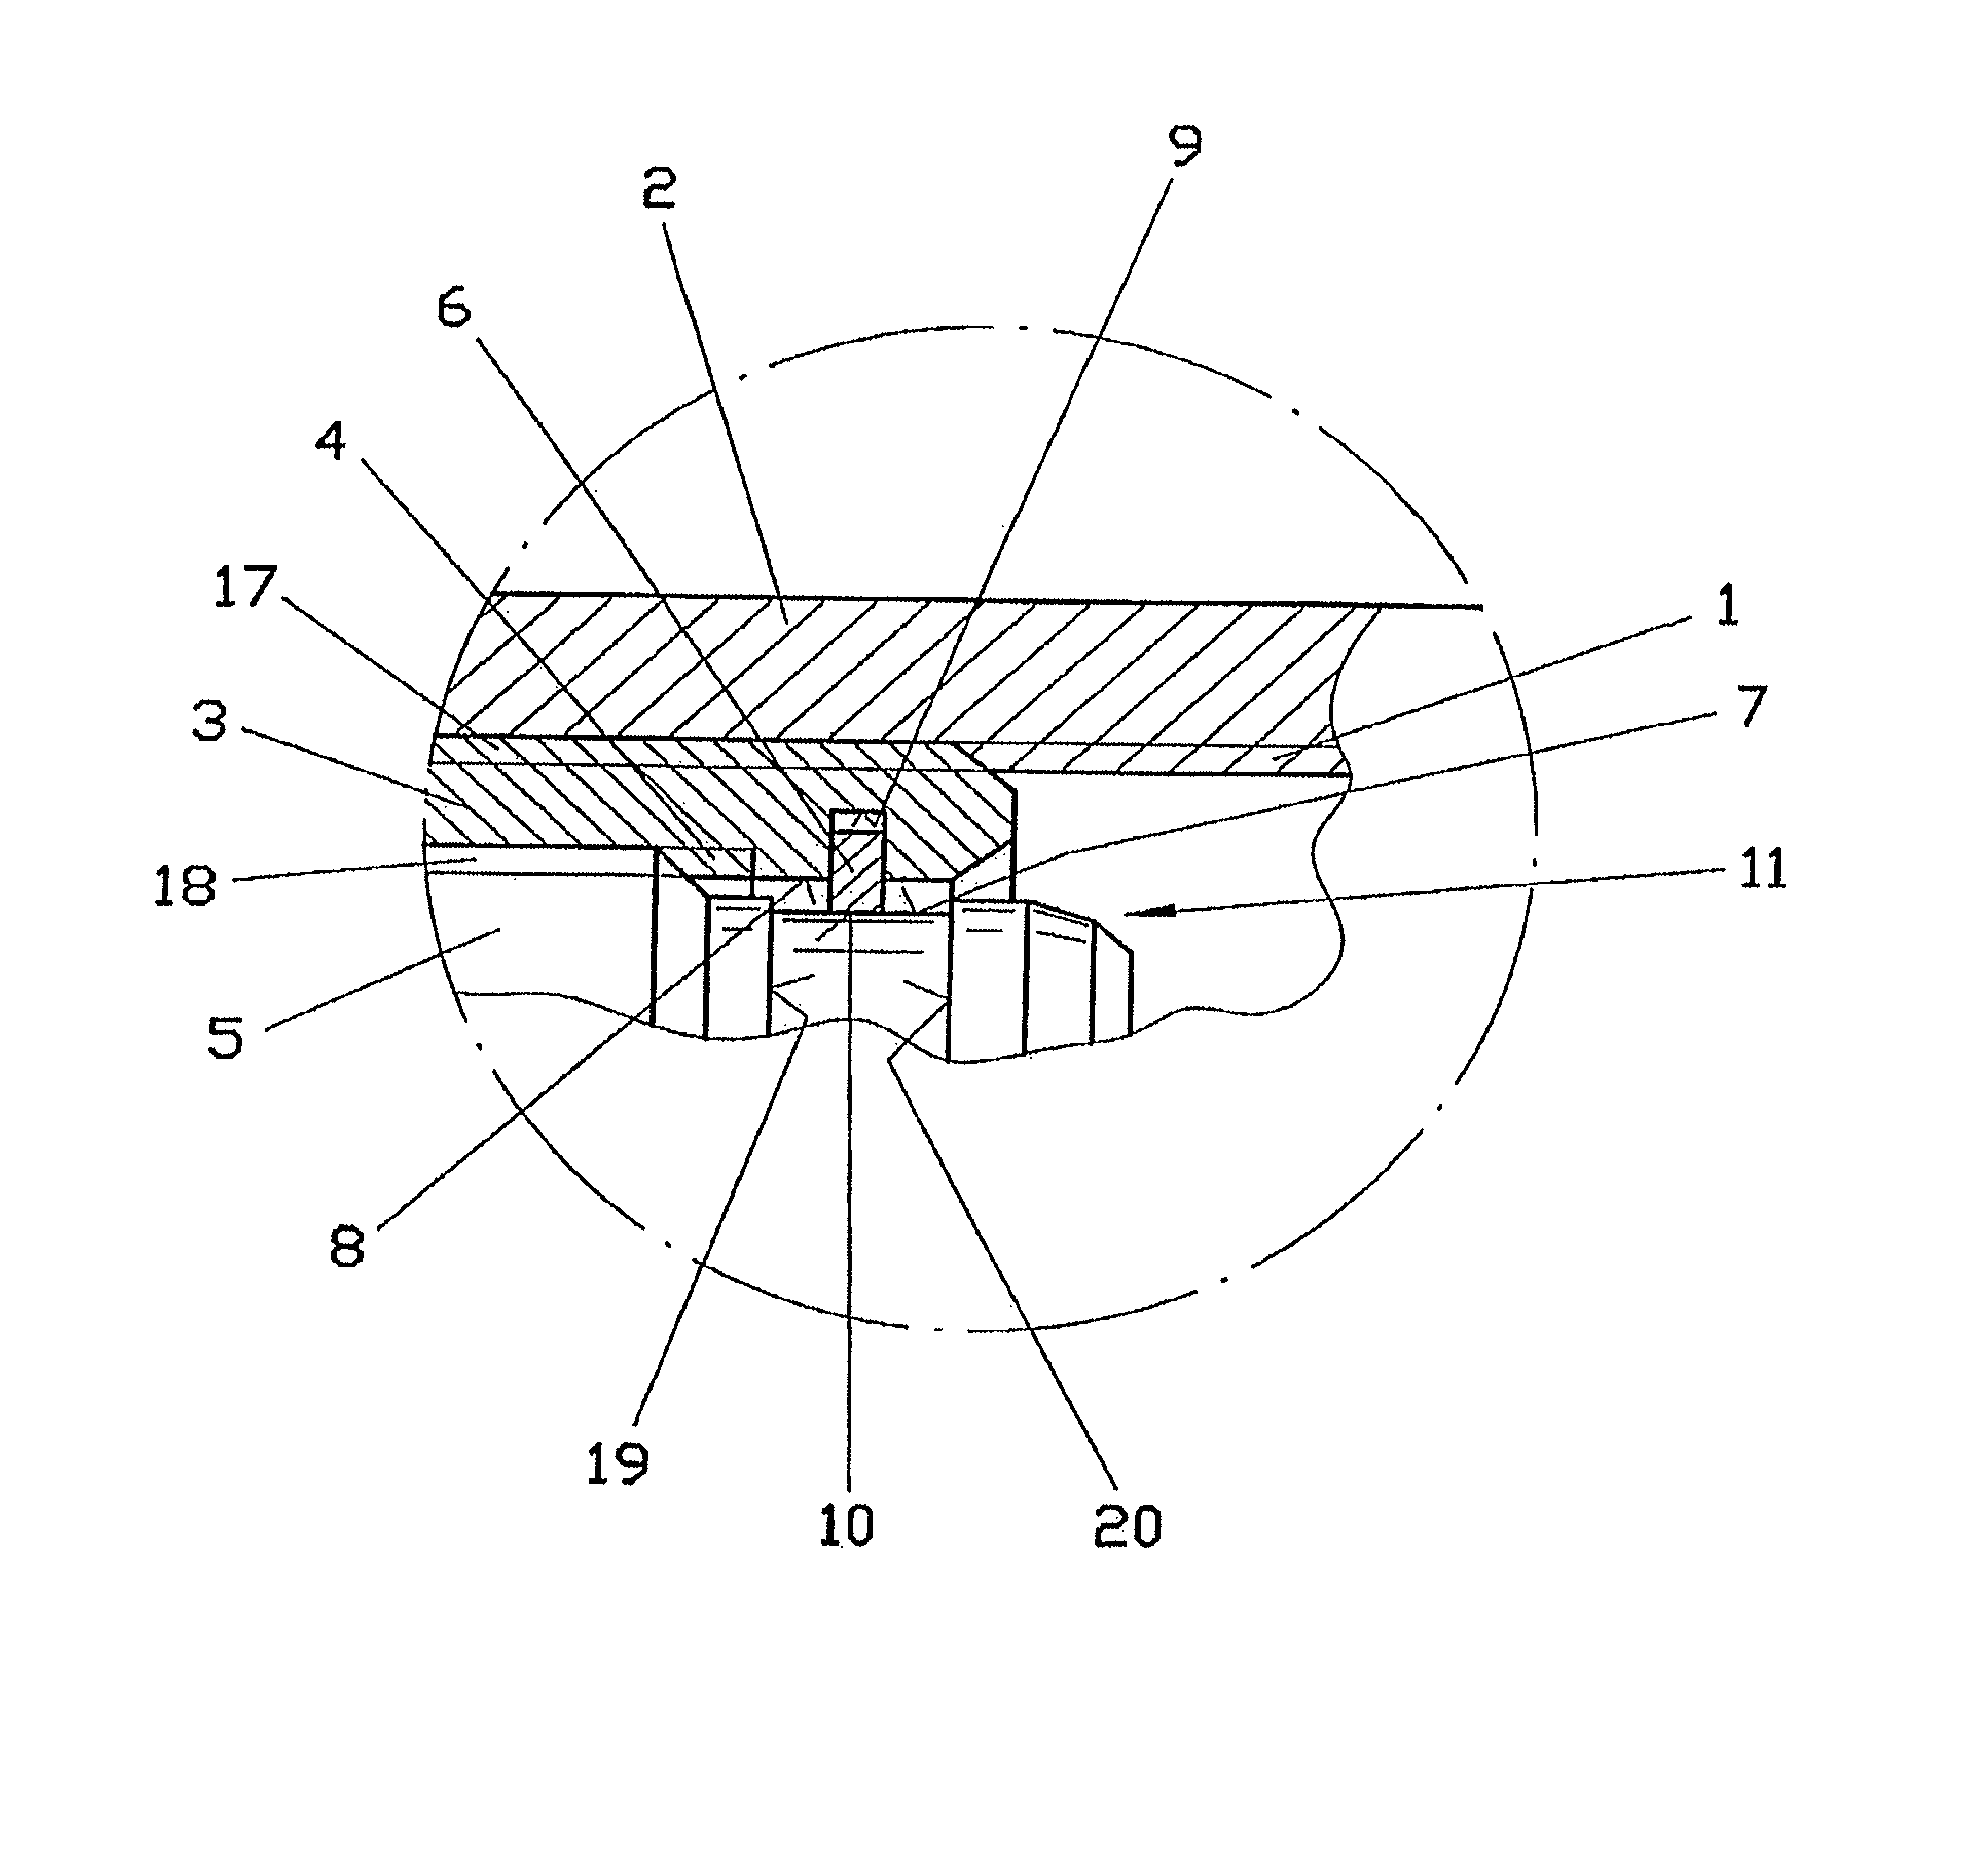 Structural unit with axial adjustment limiting elements